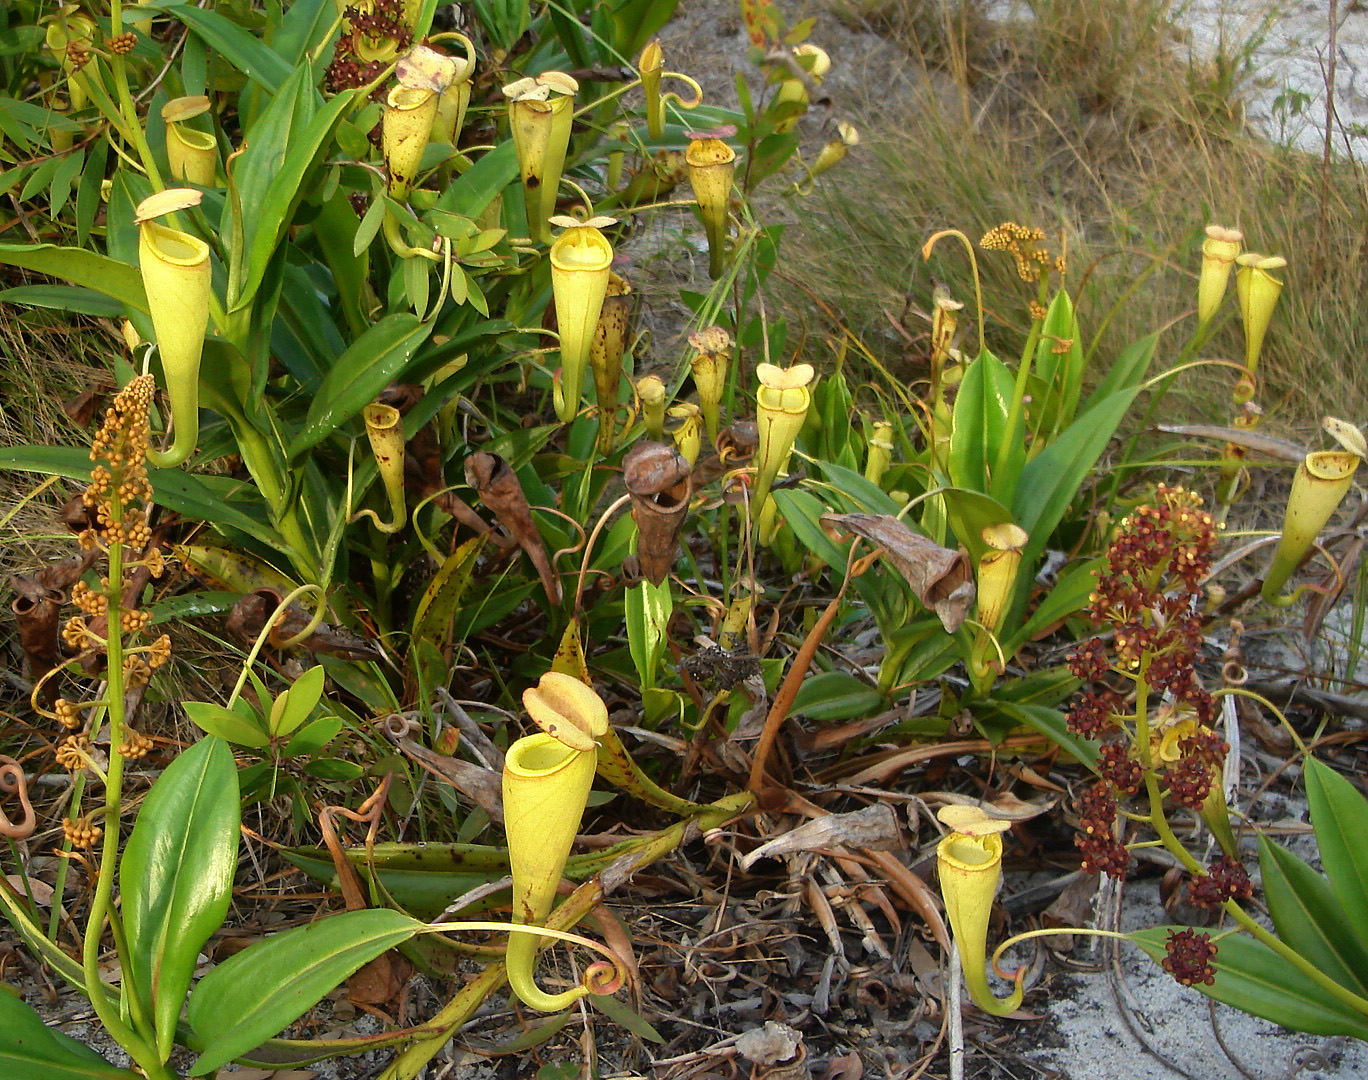 Nepenthes_madagascariensis_plants (1).jpg